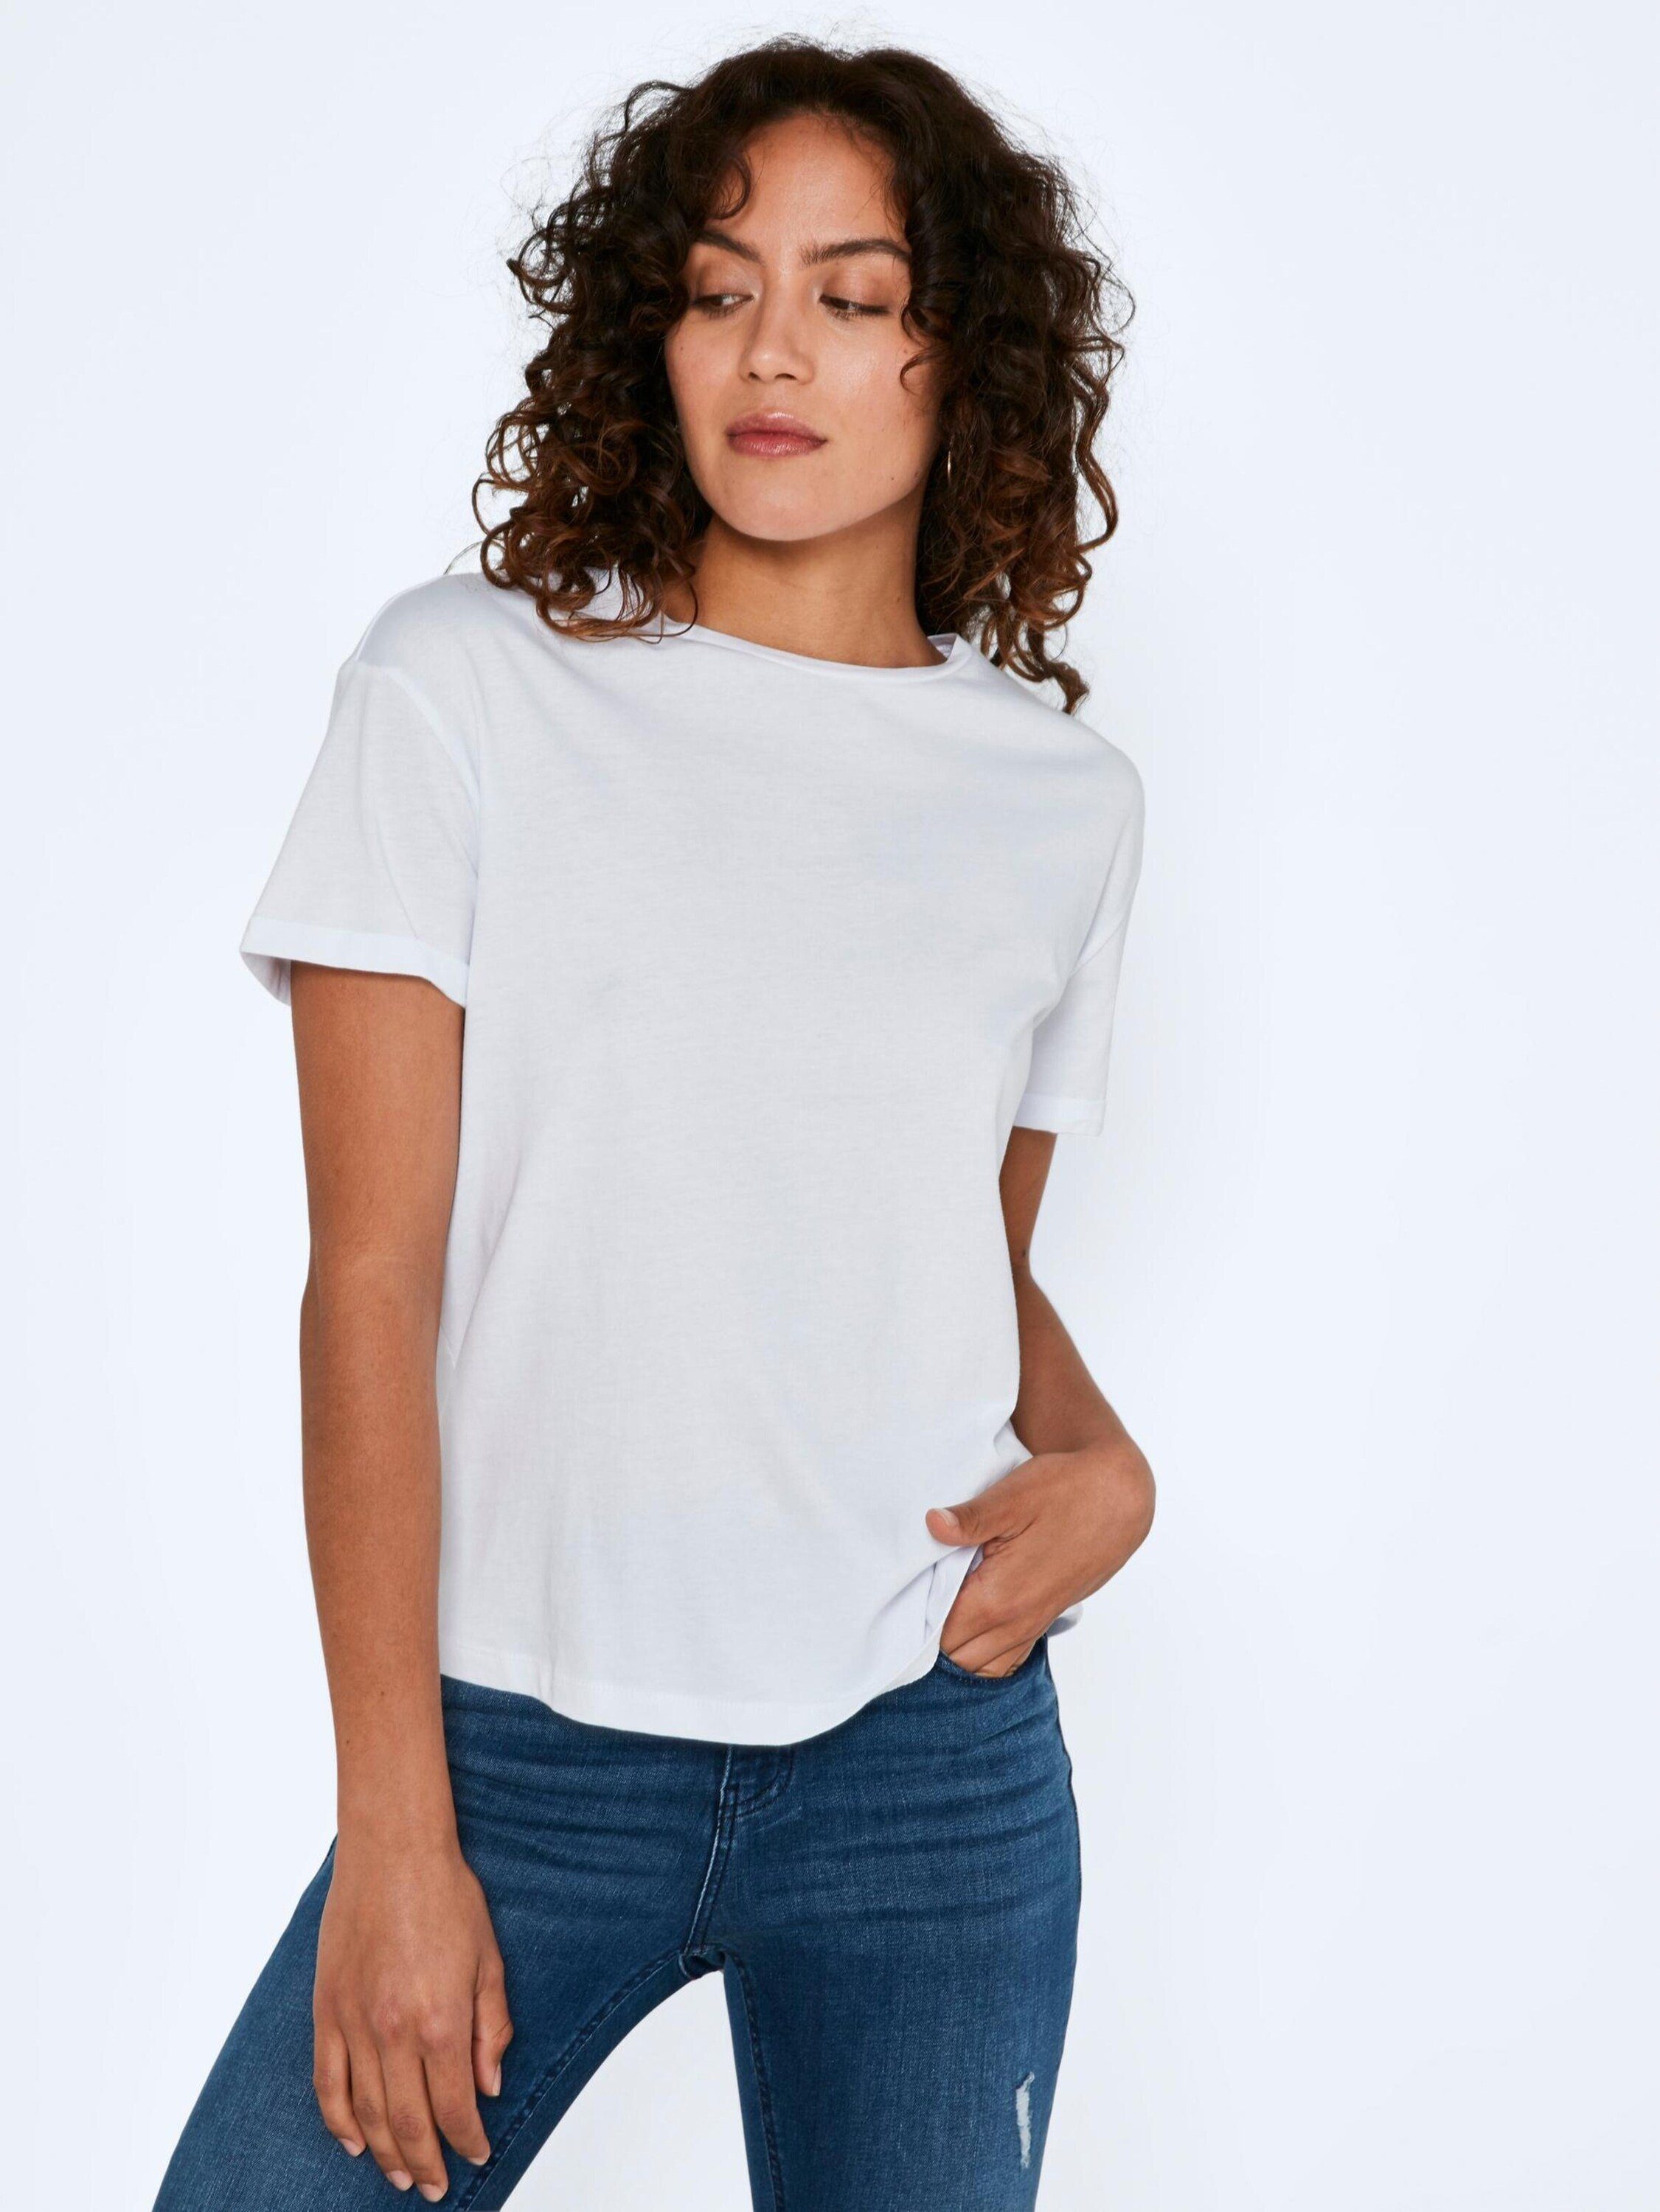 Weiteres Detail, Brandy Noisy T-Shirt Plain/ohne (1-tlg) Details may Bright White